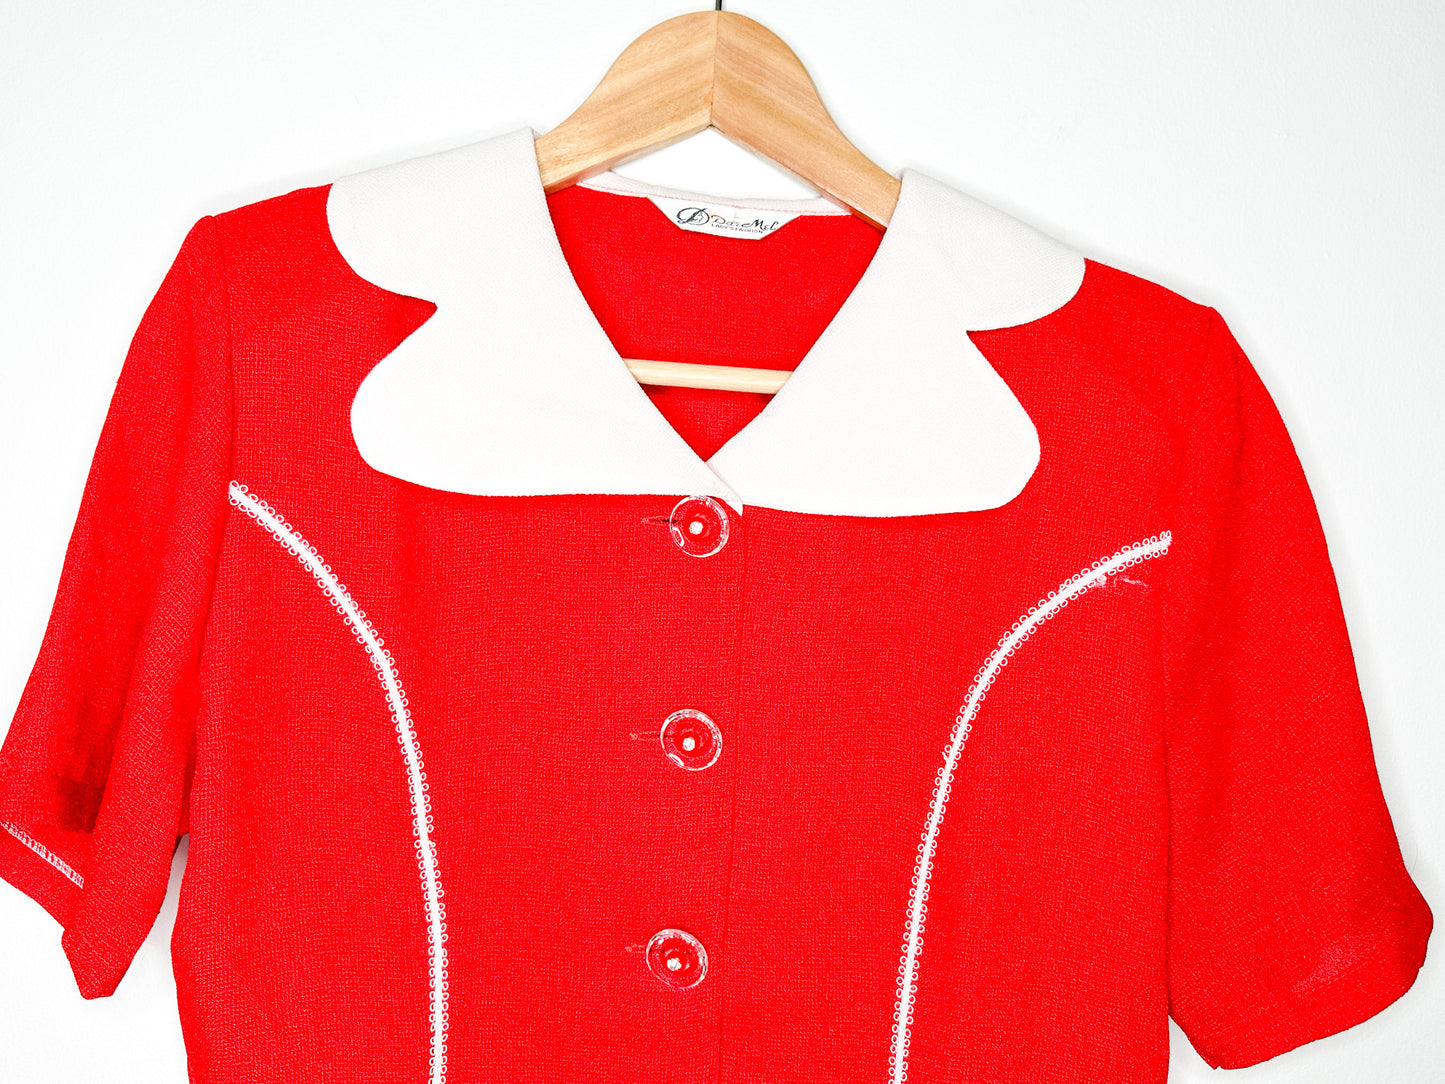 Vintage DareMel Lady's Fashion Red and White Peplum Blouse with lace detailing